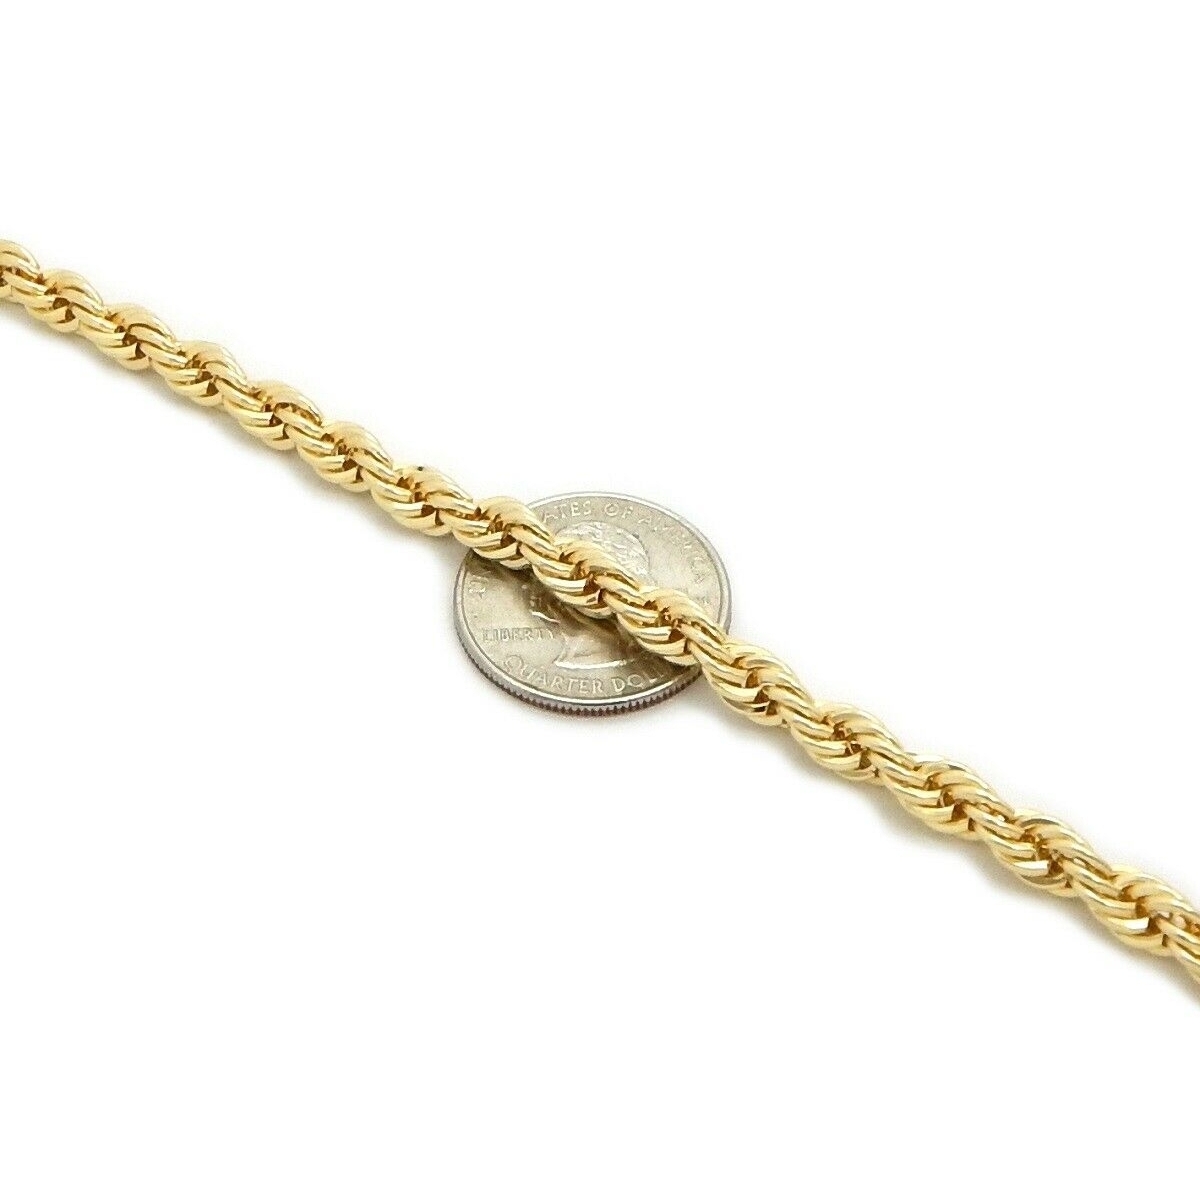 RM Men's 6mm Italian Rope Chain Necklace 14k Gold Filled High Polish Finsh  20 to 30" inch